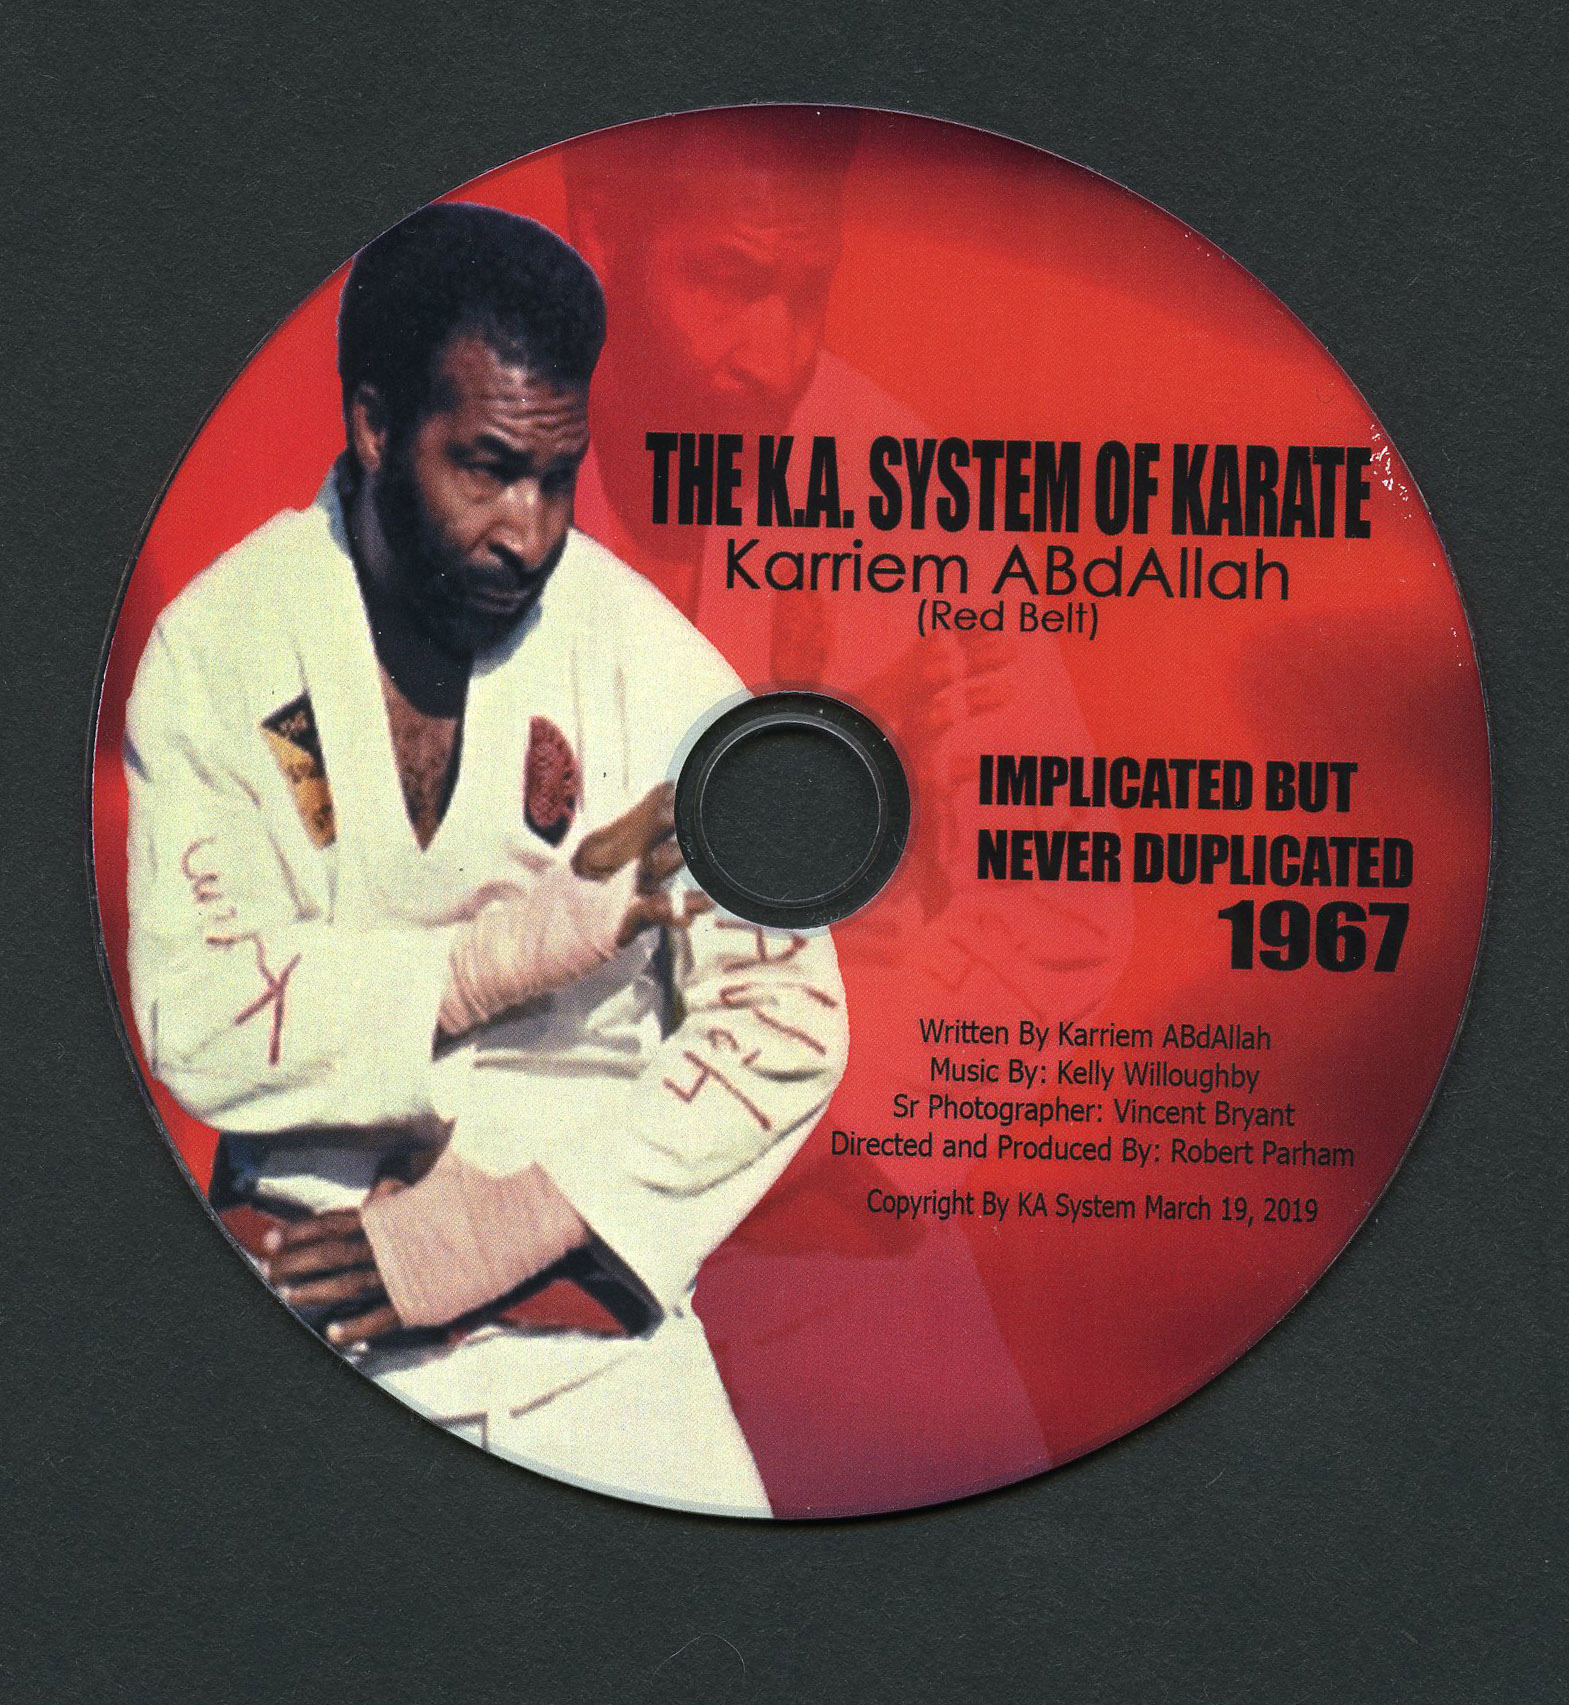 The K.A.System DVD in USA $17.95 Postage/Taxi ncluded Domestic Price $31.99